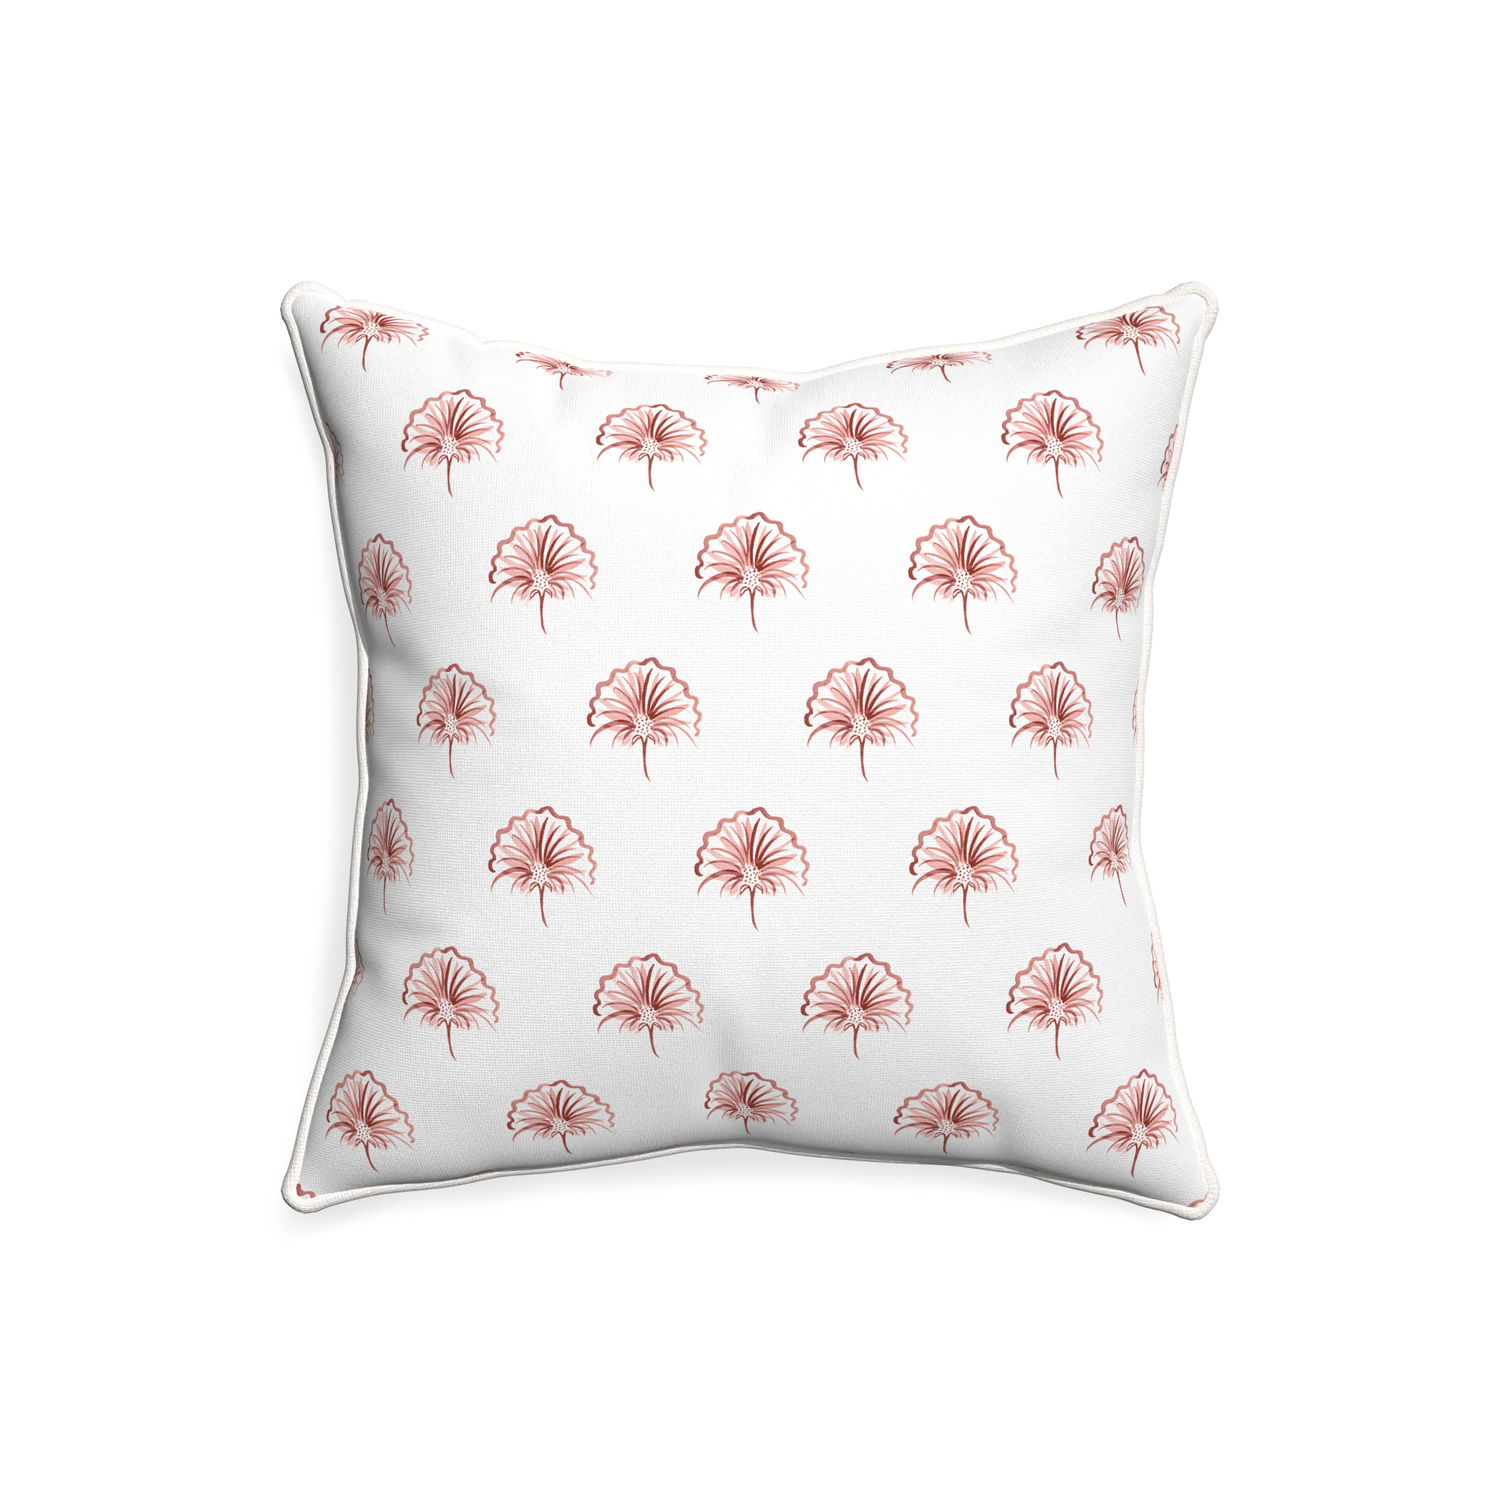 20-square penelope rose custom floral pinkpillow with snow piping on white background